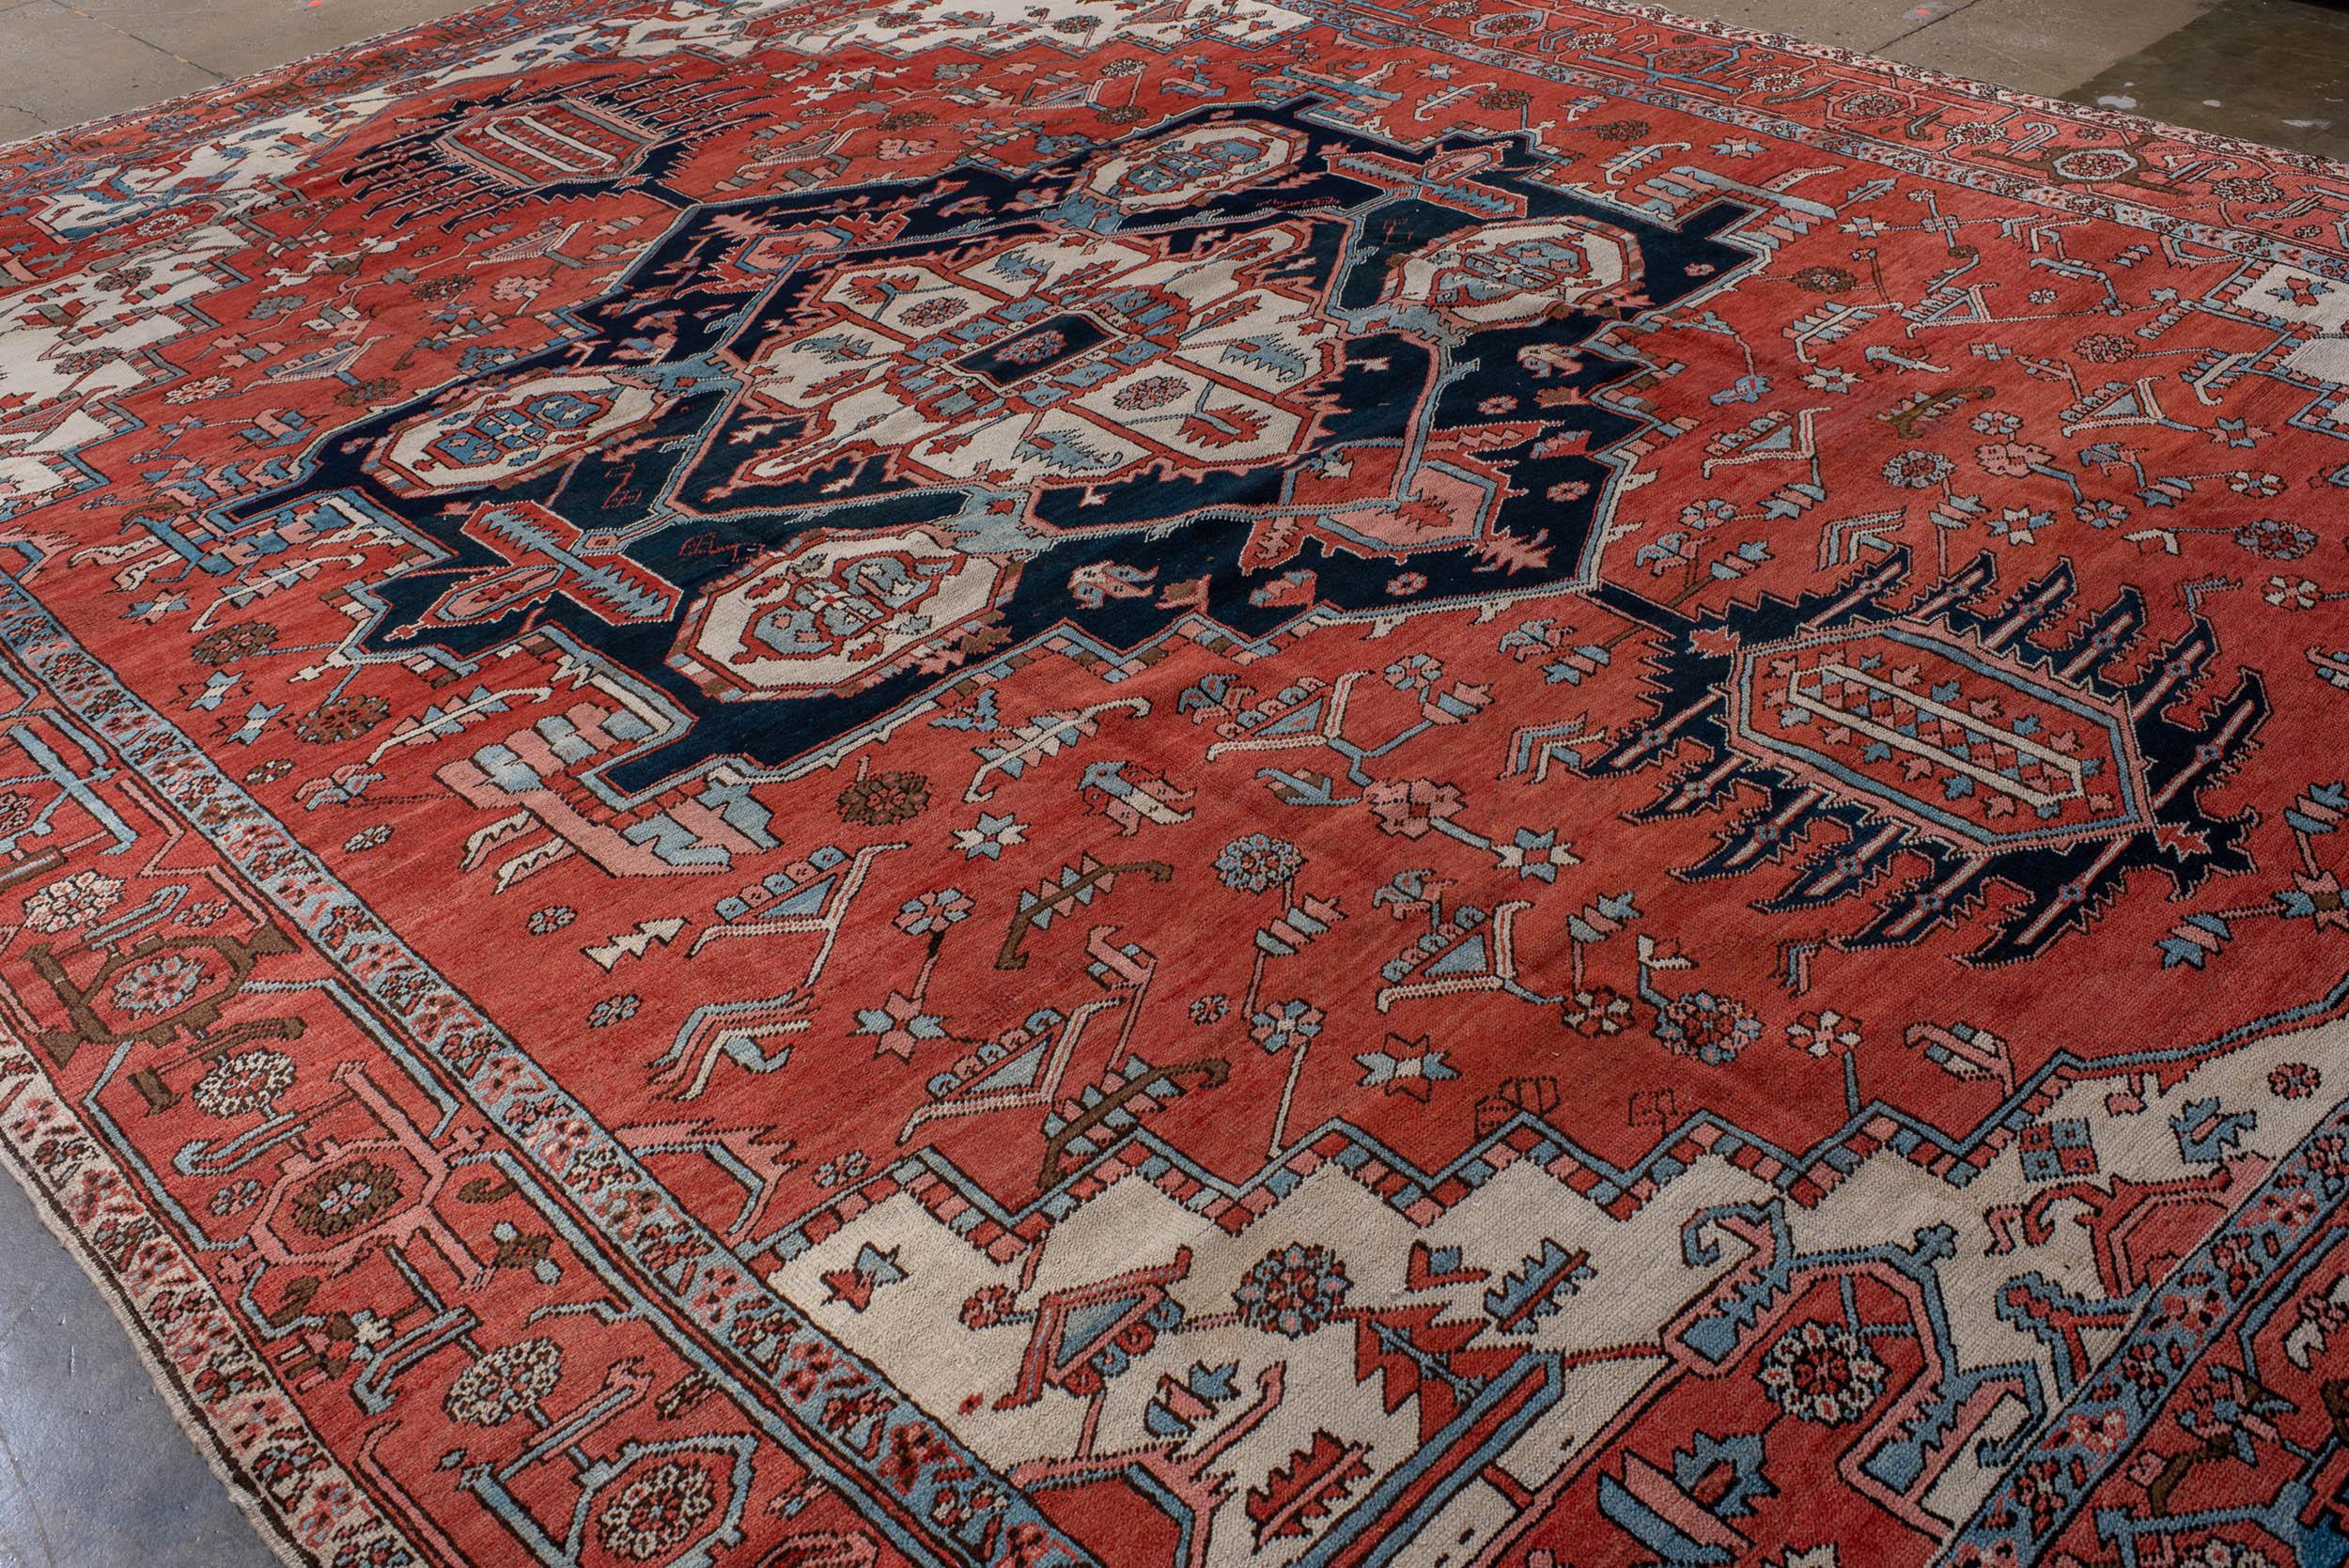 Hand-Woven Antique Persian Fine Serapi Handwoven Luxury Wool Red Rug 11'-4